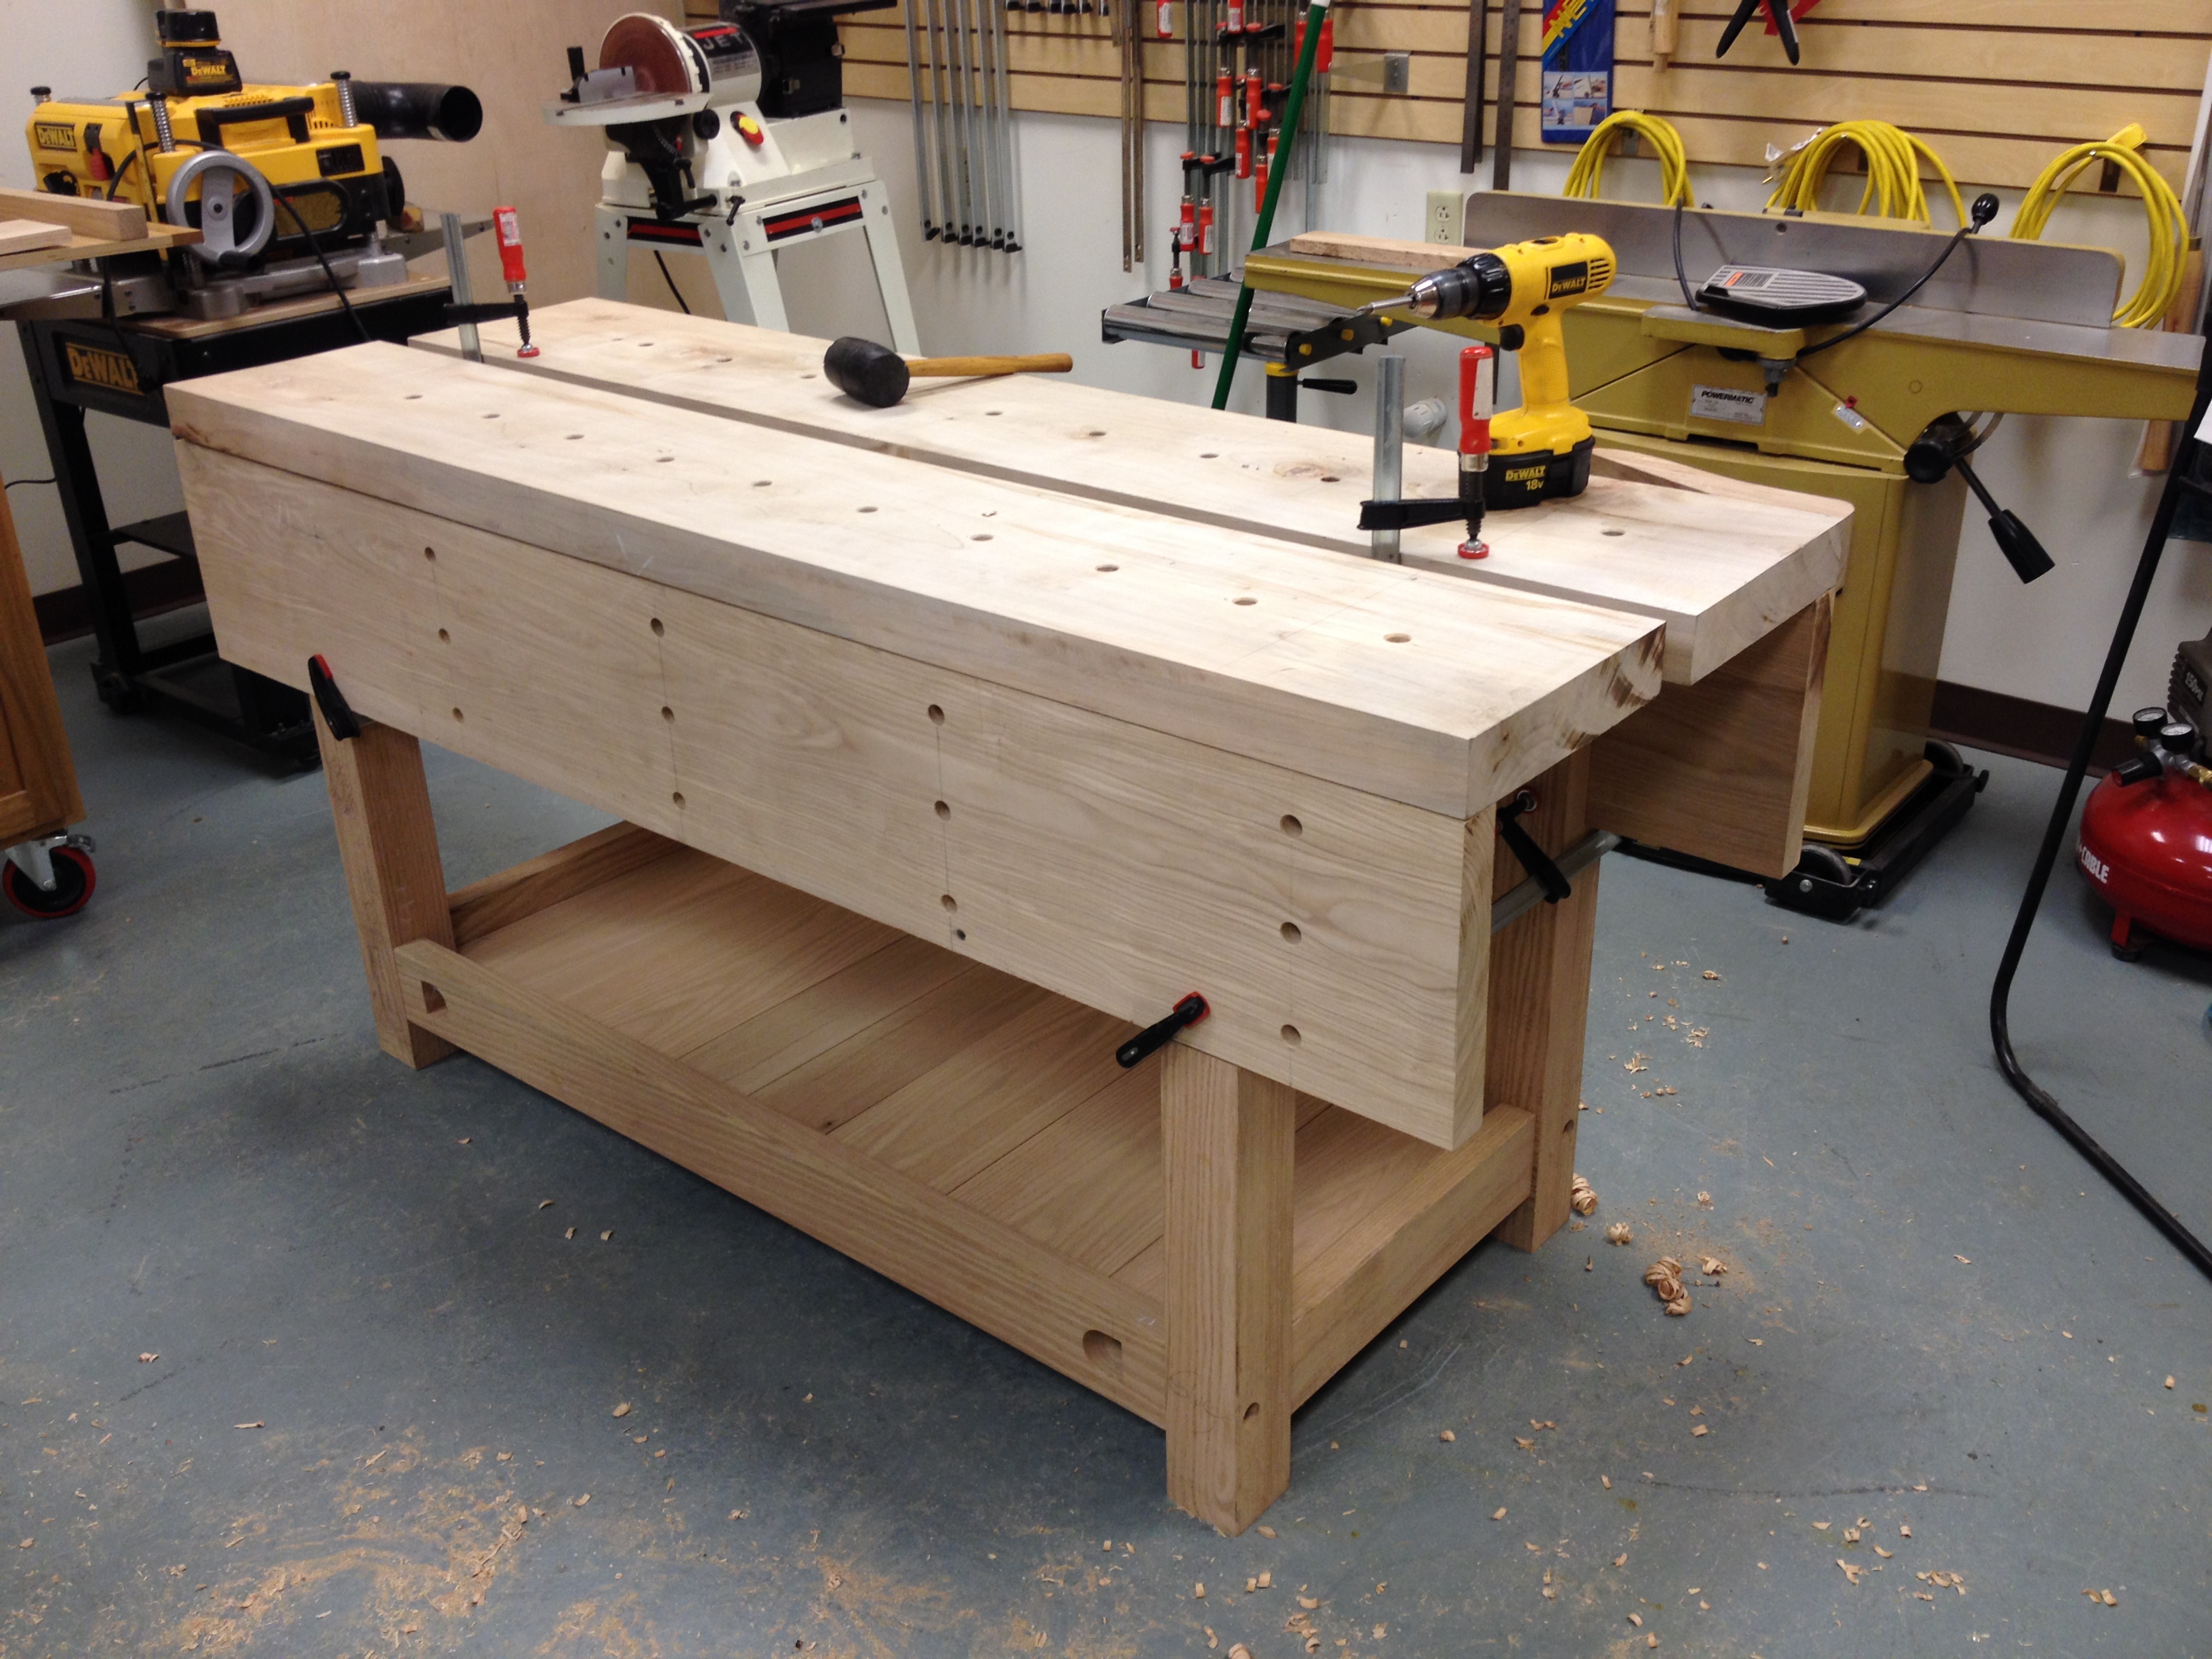 Nicholson Bench Project – A gallery A Woodworker's Musings